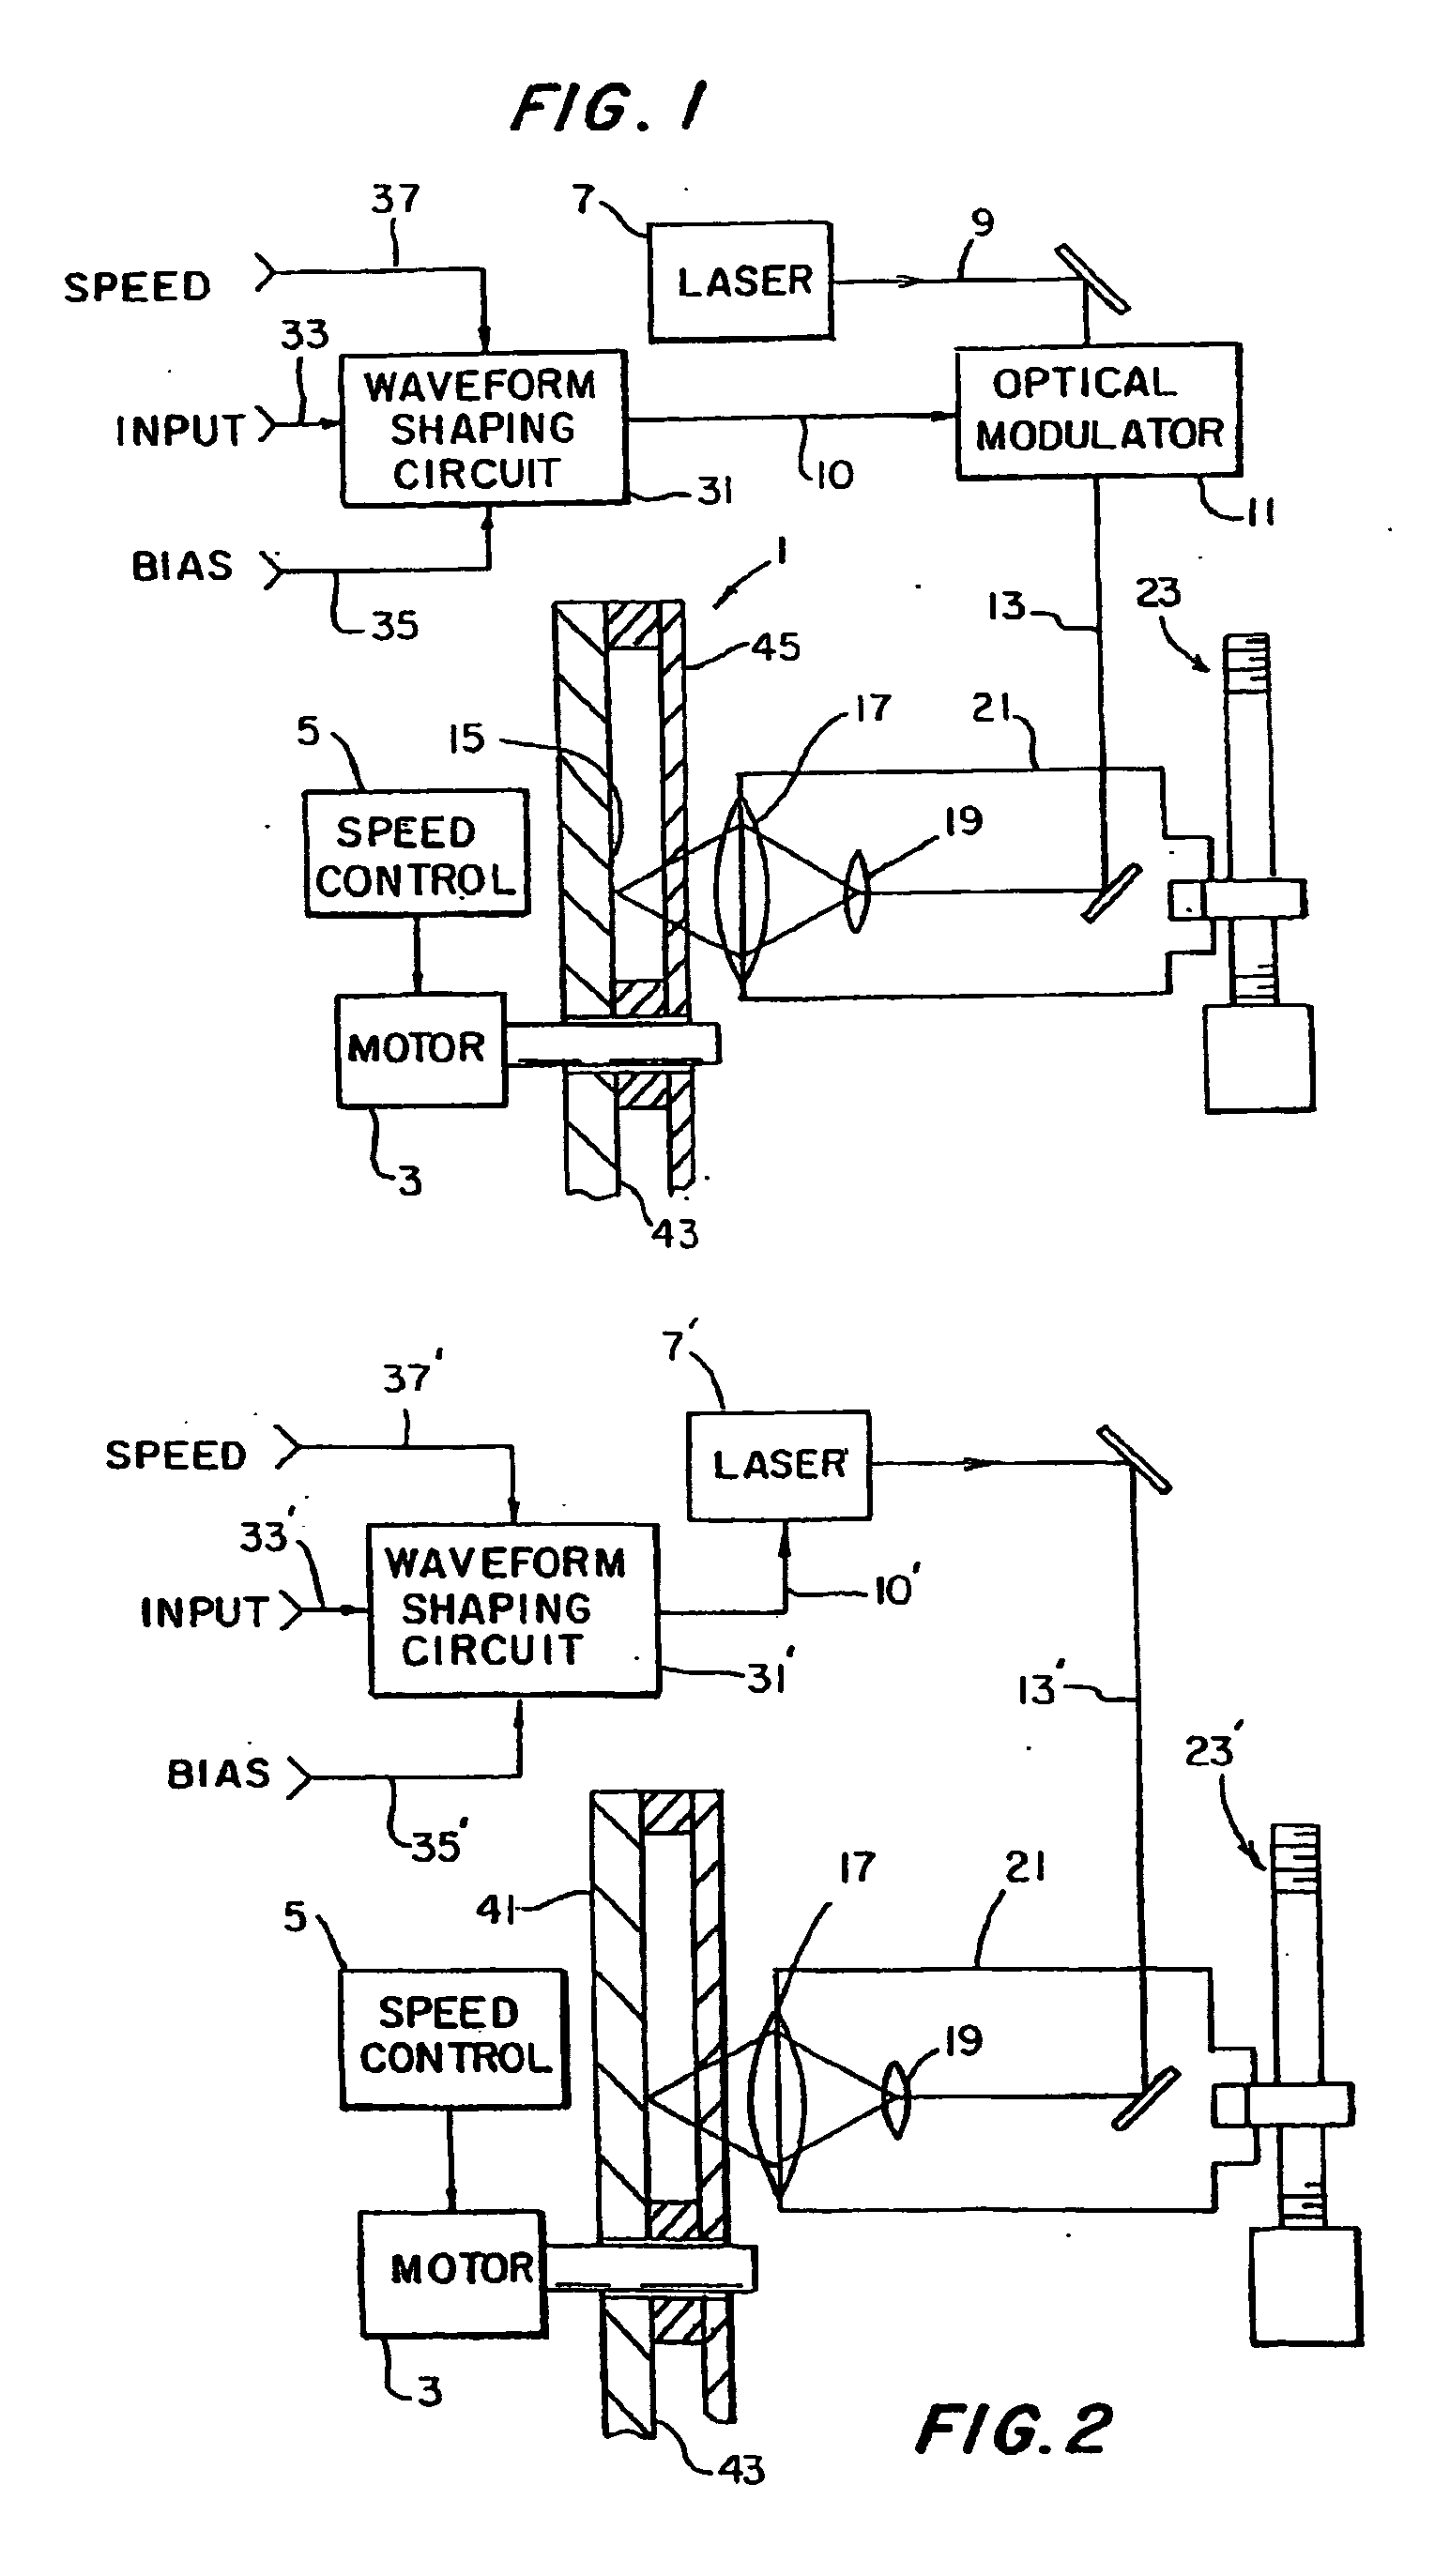 Configuration of three-dimensional features in data recording structures